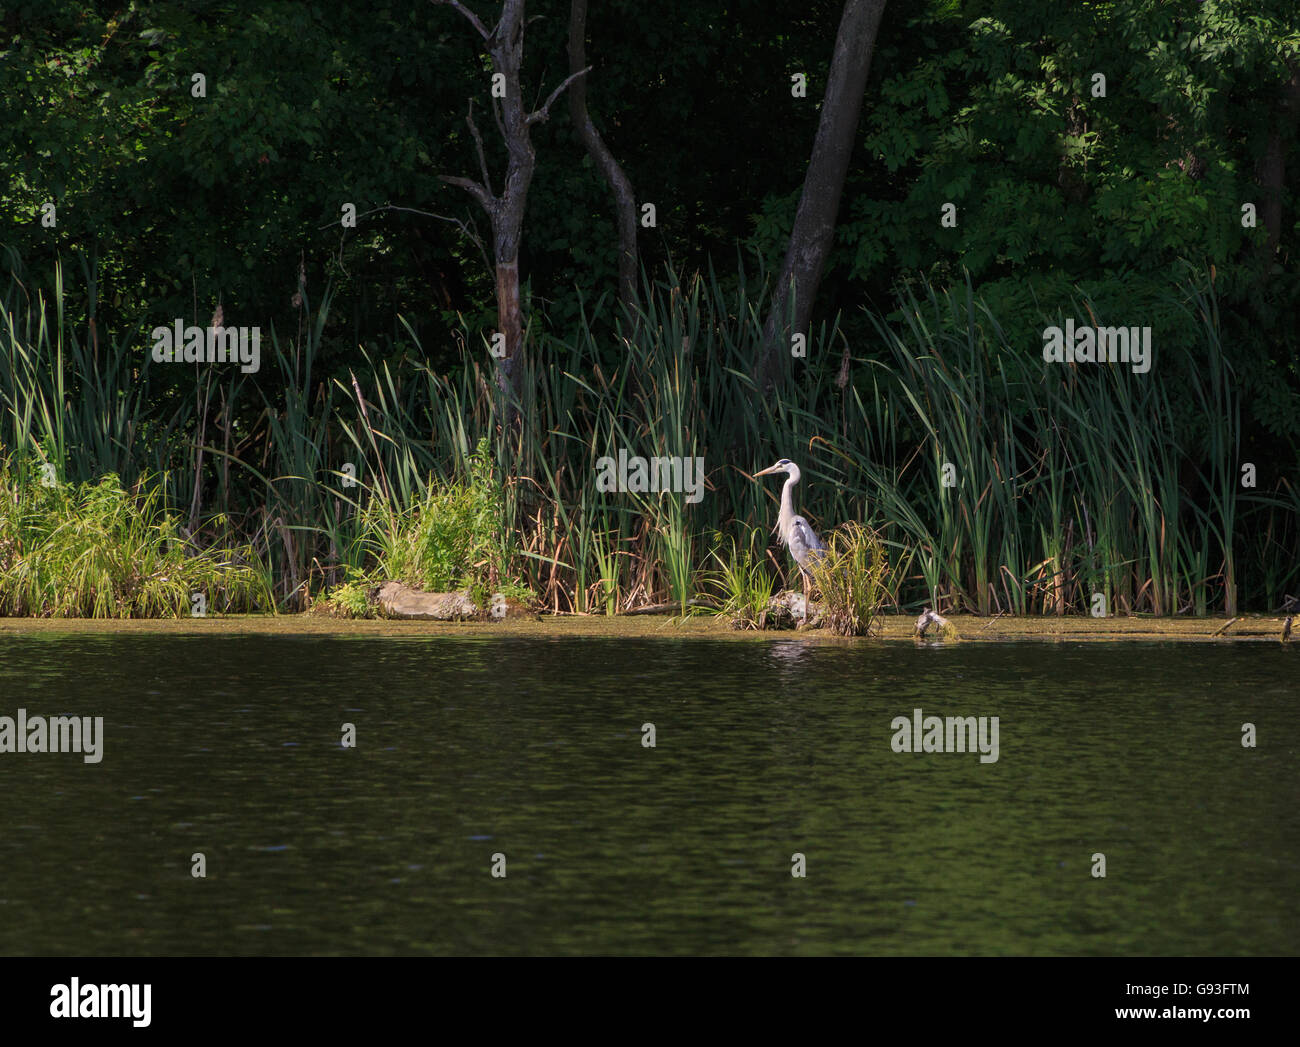 landscape with grey heron standing on coast of lake Stock Photo